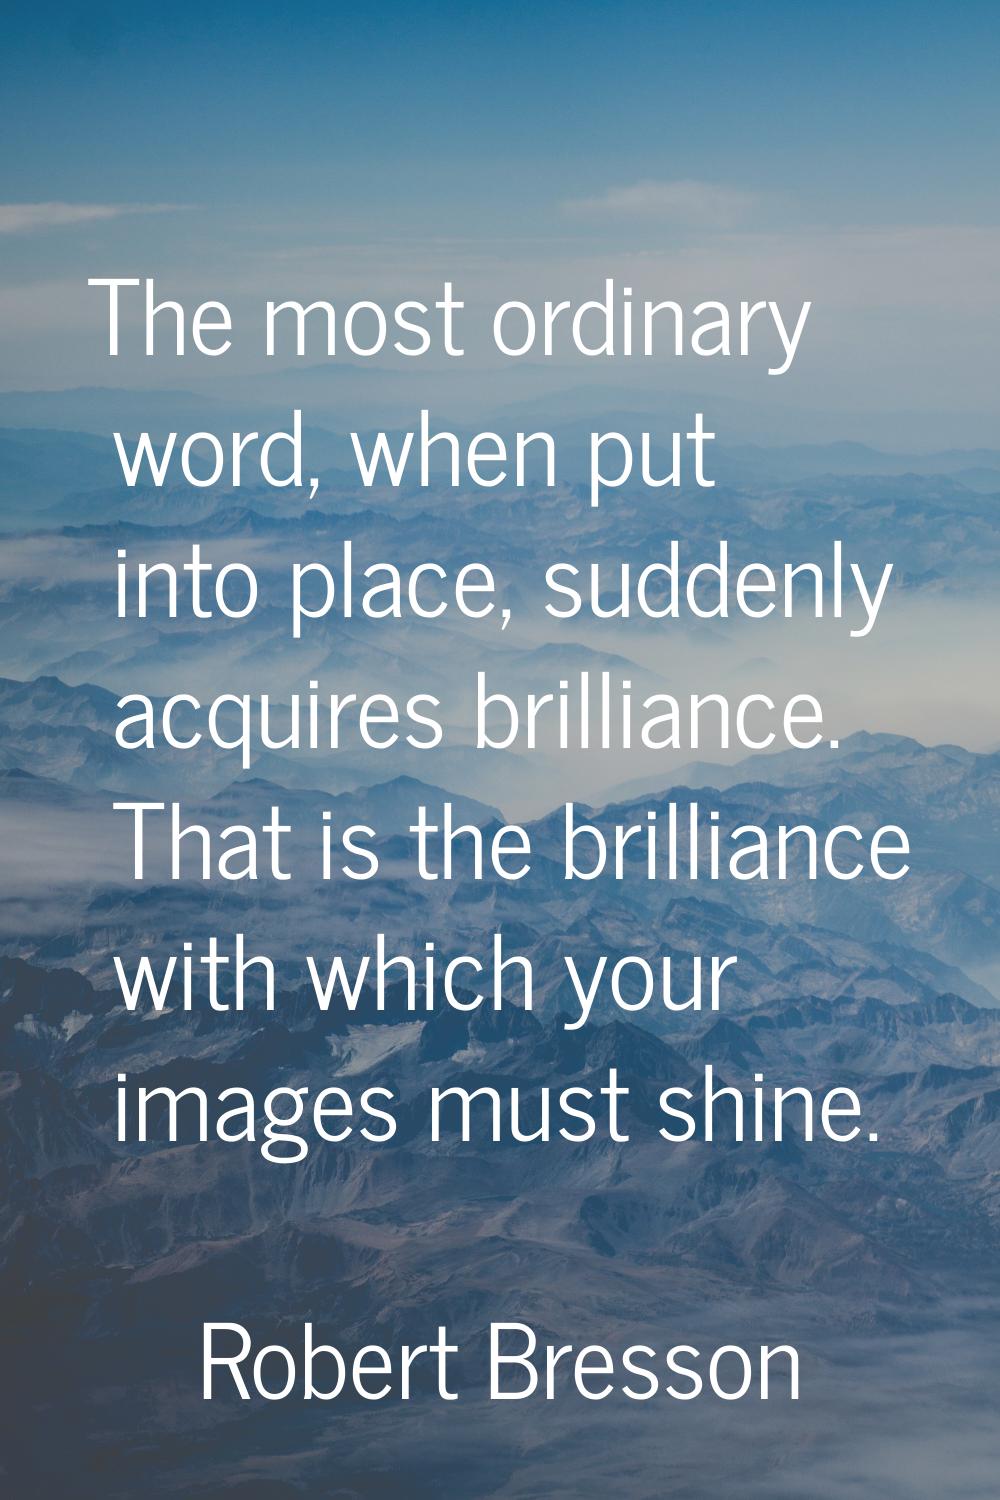 The most ordinary word, when put into place, suddenly acquires brilliance. That is the brilliance w